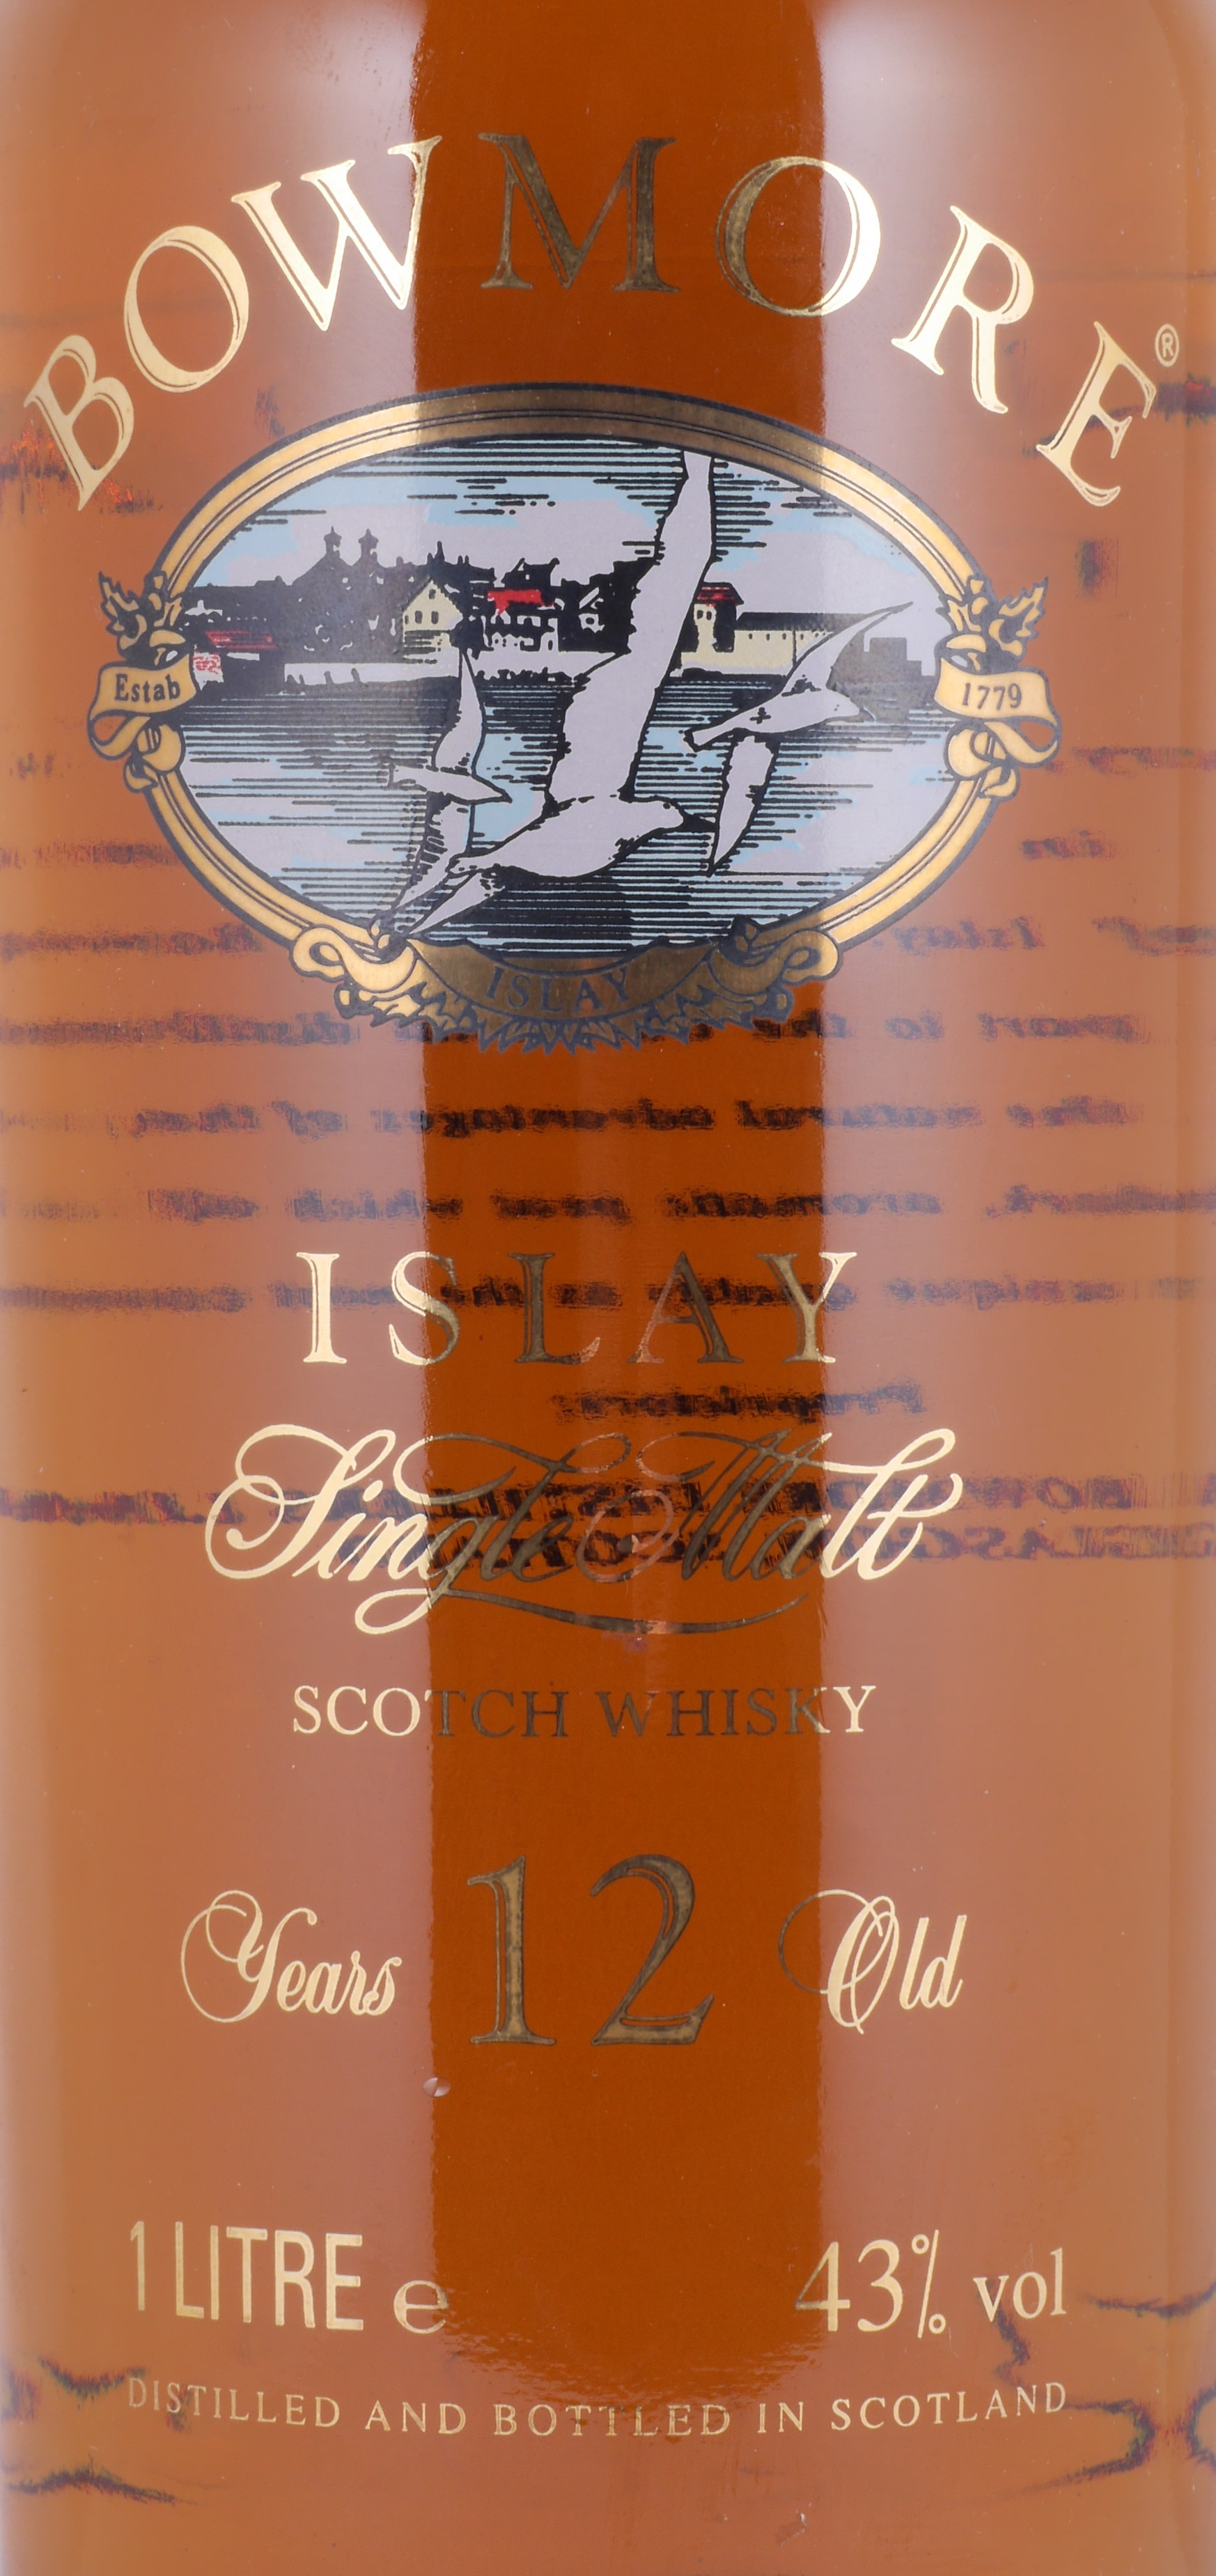 with ABV 3 Years-old Bowmore at Printed online Malt Scotch 43.0% Islay secure Label Glass Single 12 Icons Buy Whisky AmCom